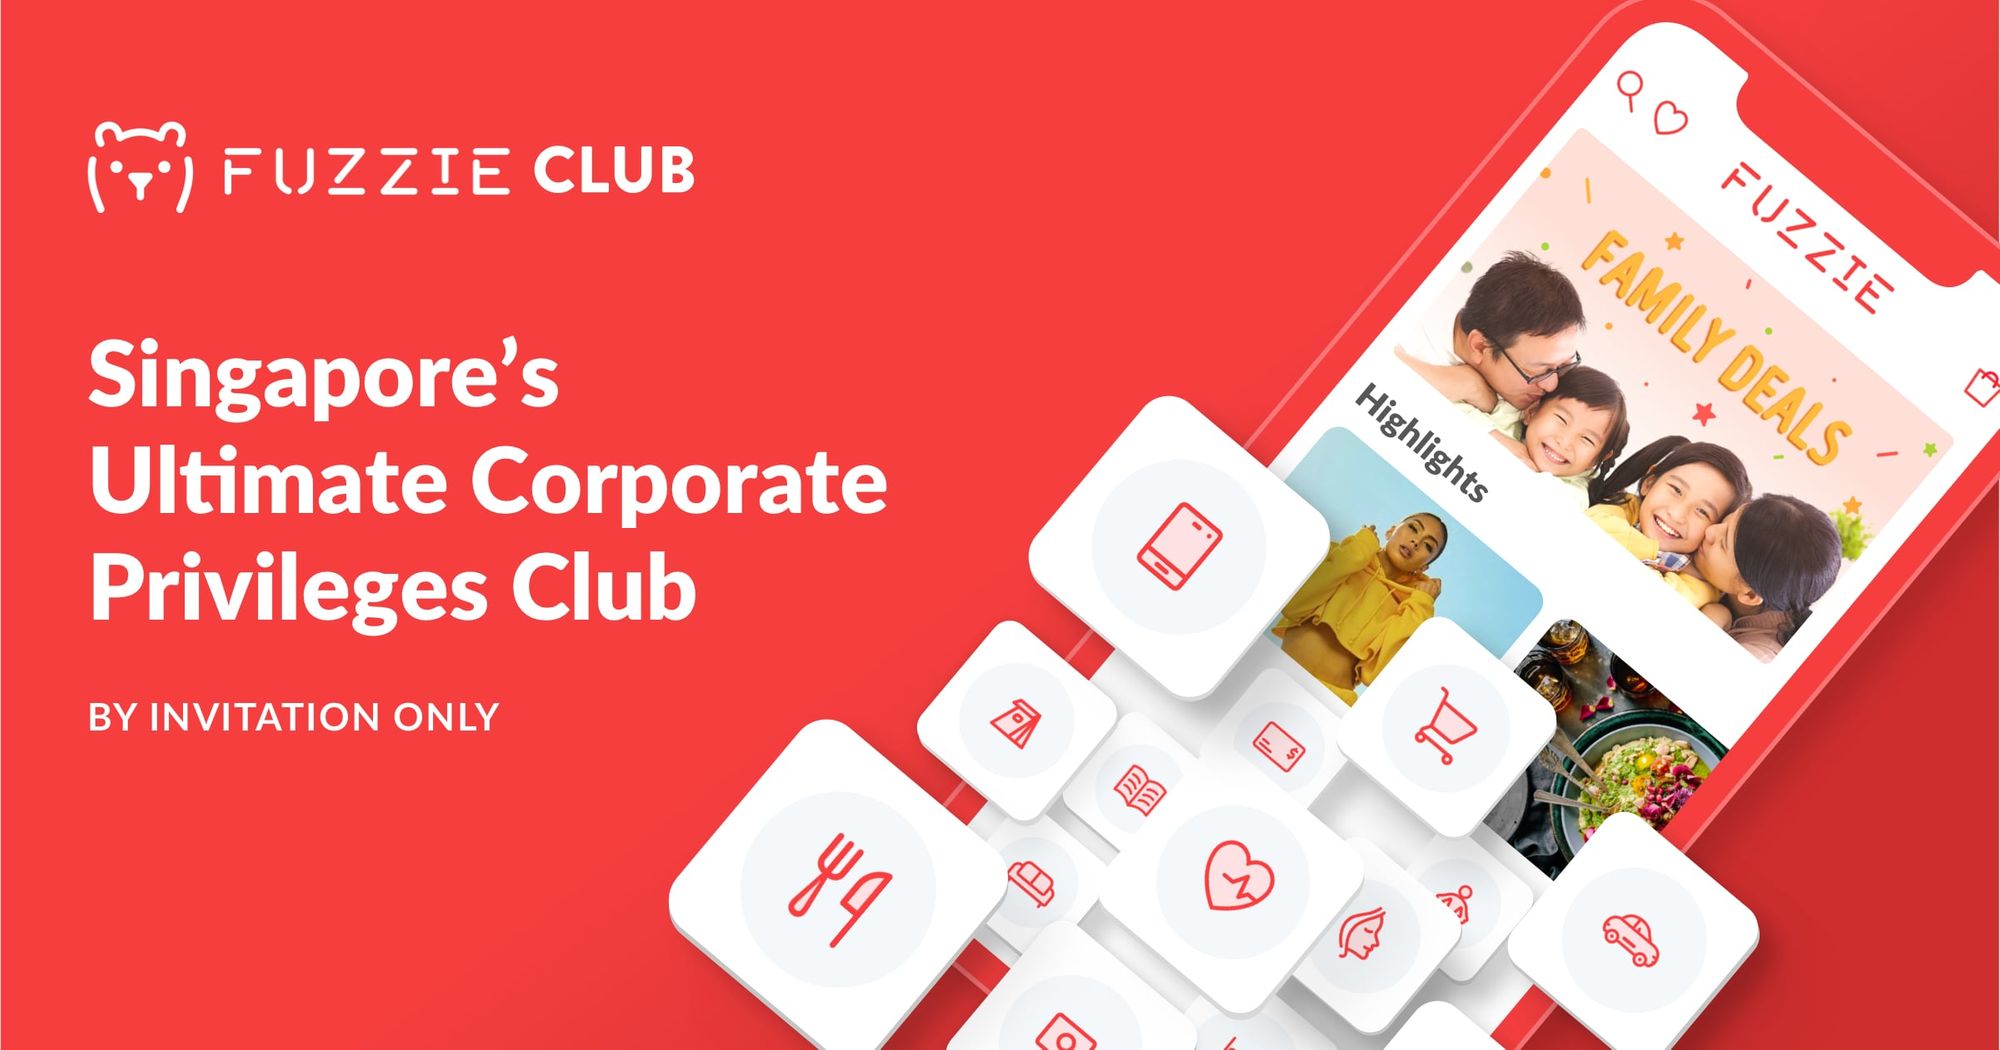 How to get FREE Fuzzie Club membership with your promo code